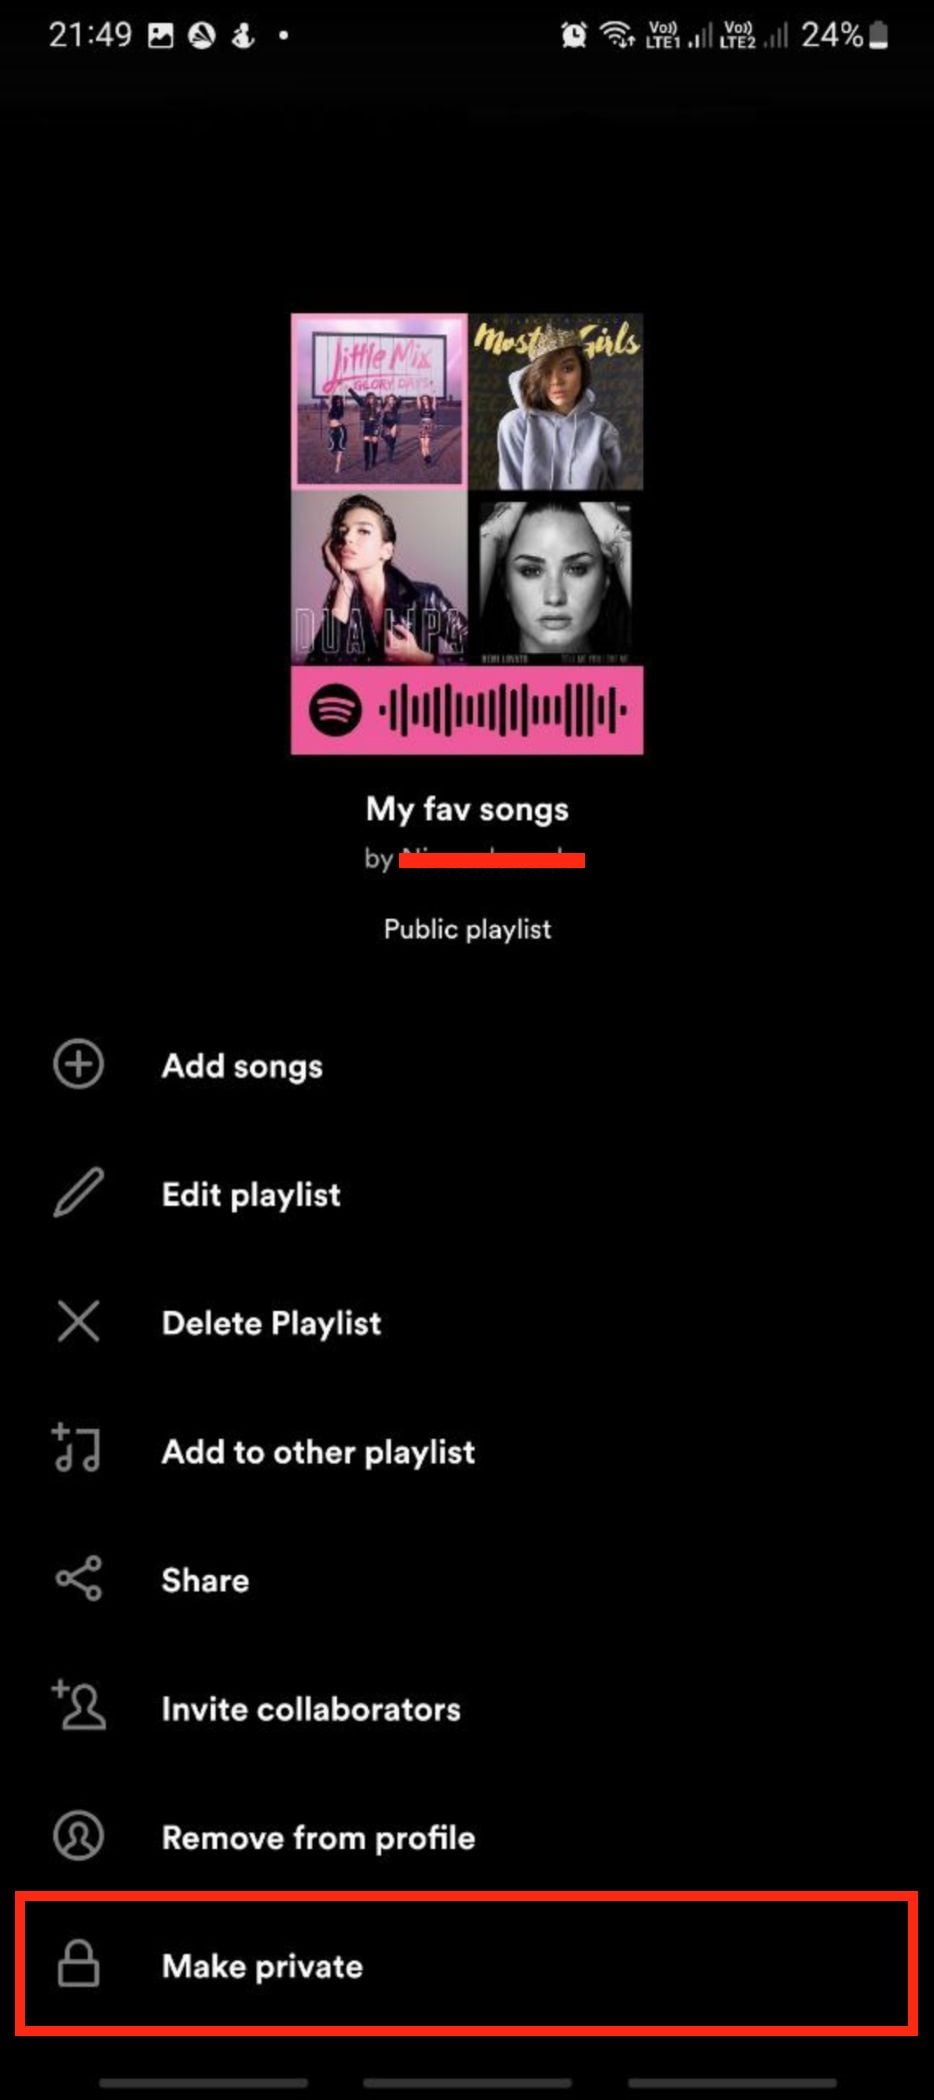 How to Make a Private Playlist on Spotify Using Android